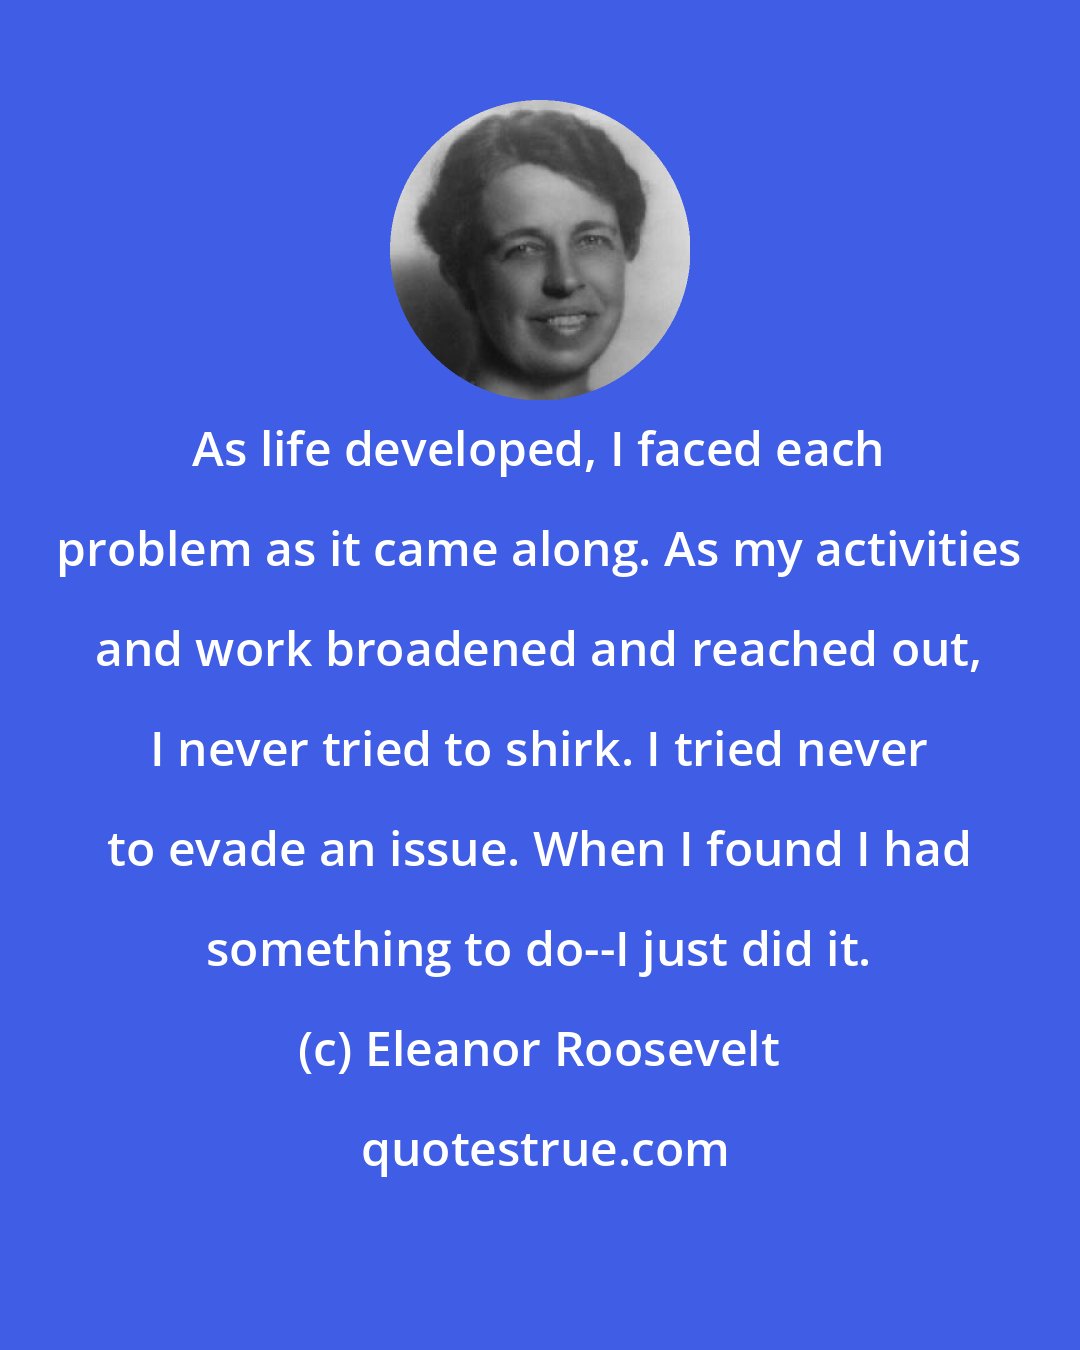 Eleanor Roosevelt: As life developed, I faced each problem as it came along. As my activities and work broadened and reached out, I never tried to shirk. I tried never to evade an issue. When I found I had something to do--I just did it.